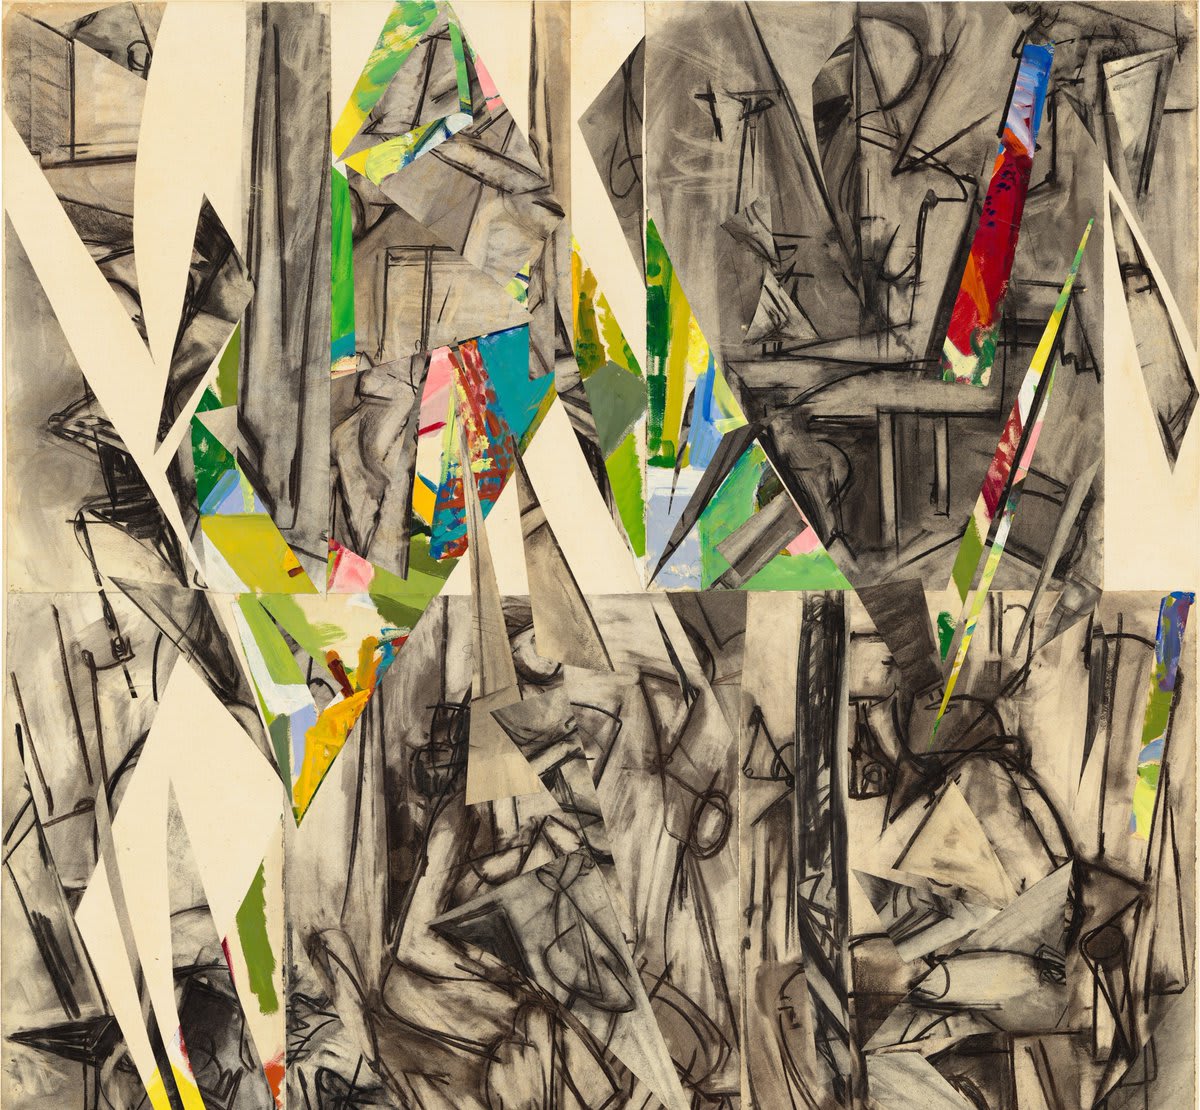 Abstract expressionist painter Lee Krasner consistently fought for recognition in a male-dominated art world. She wanted to be seen simply as an artist, not a female artist. In “Imperative” (1976), Krasner integrated old charcoal drawings of figures with shredded painted canvas✂️